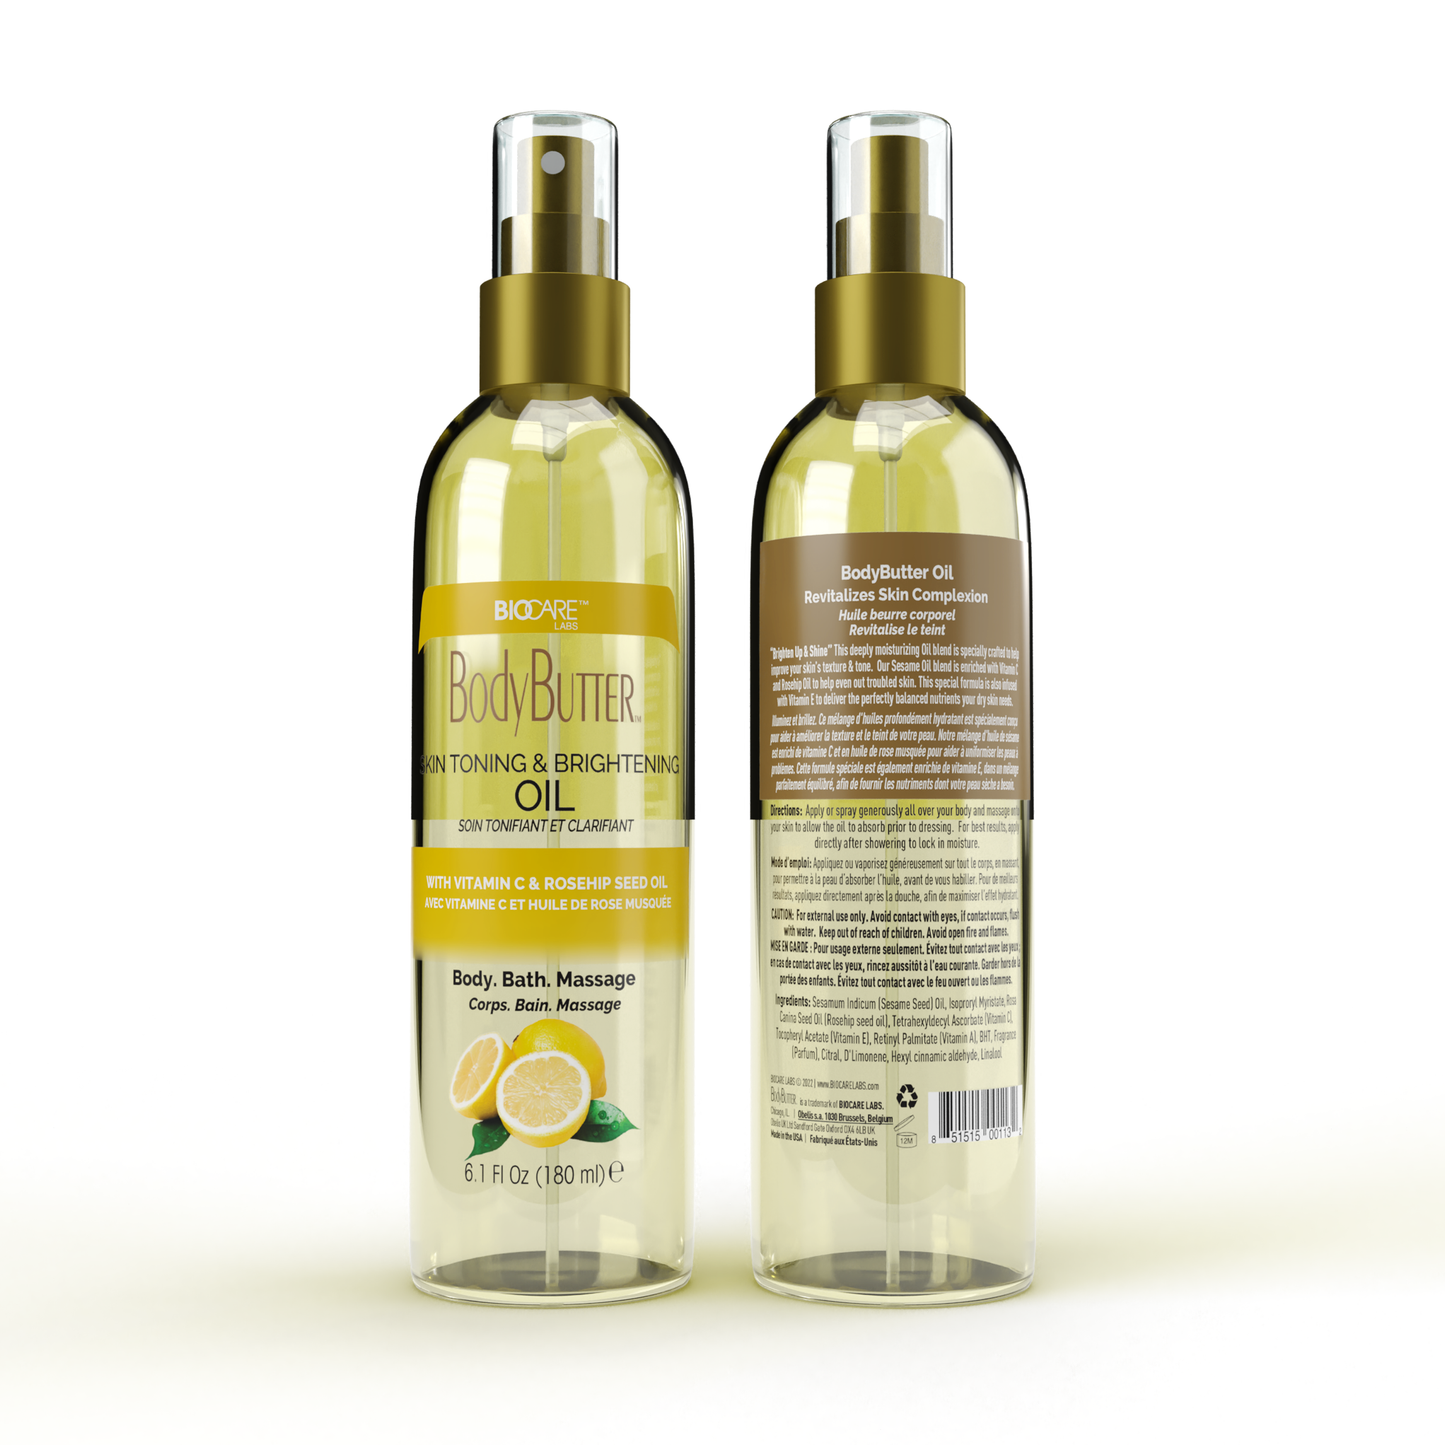 SKIN BRIGHTENING BODY OIL with VITAMIN C & ROSEHIP SEED OIL